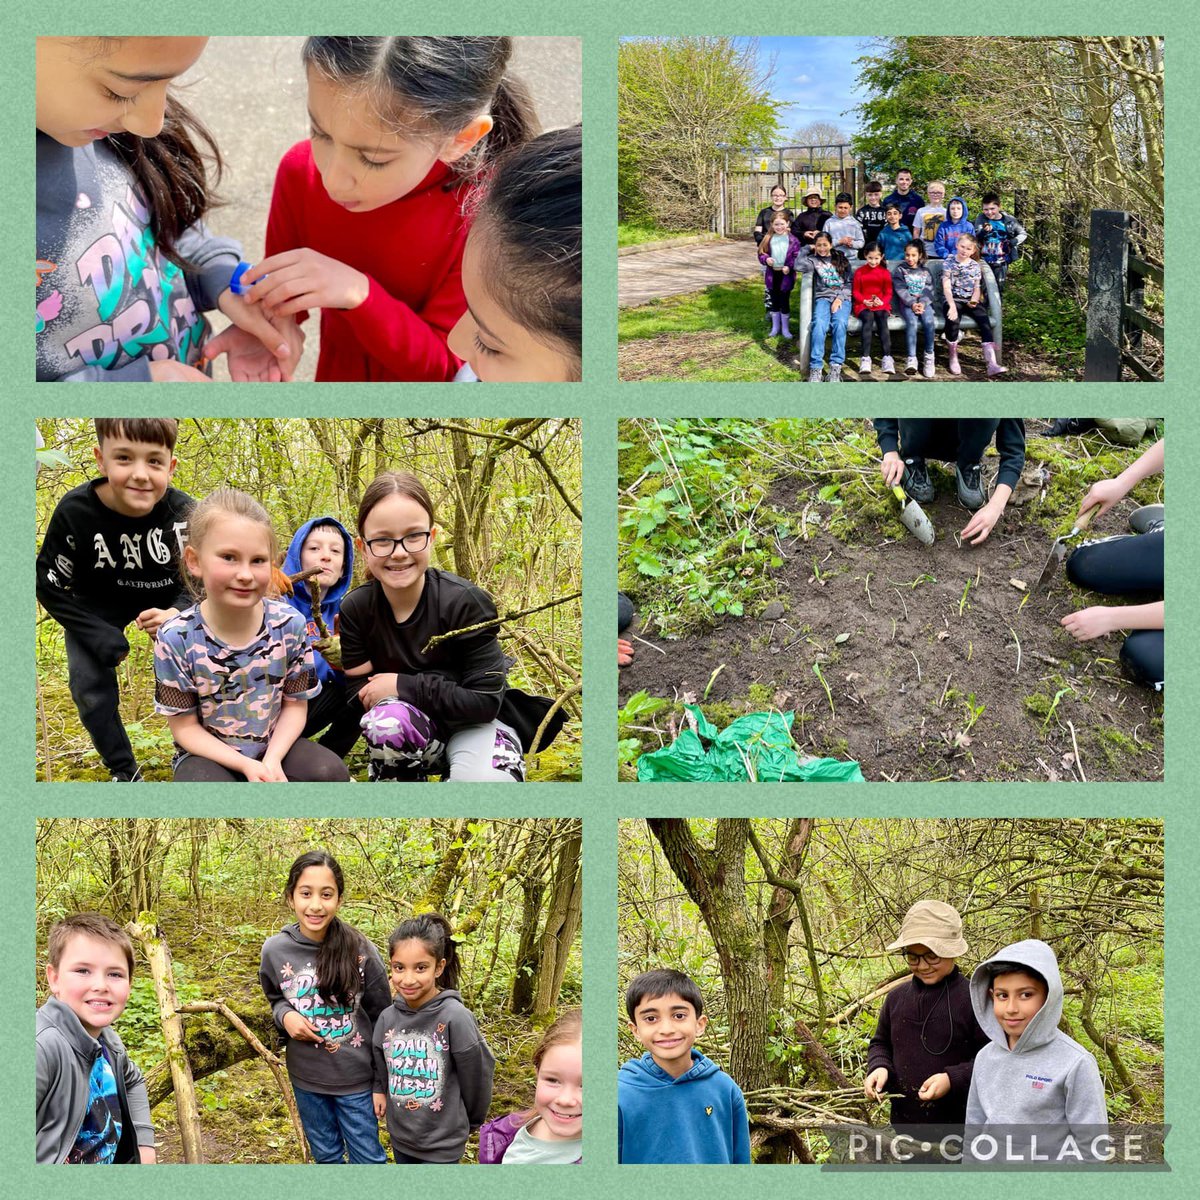 VYGA was back with a fully loaded session today! We planted wild garlic, completed a nature hunt, built mini beast shelters, moved some wood chips and planted some moss for our barefoot walk! Thank you all for joining in on todays session #UKSPF